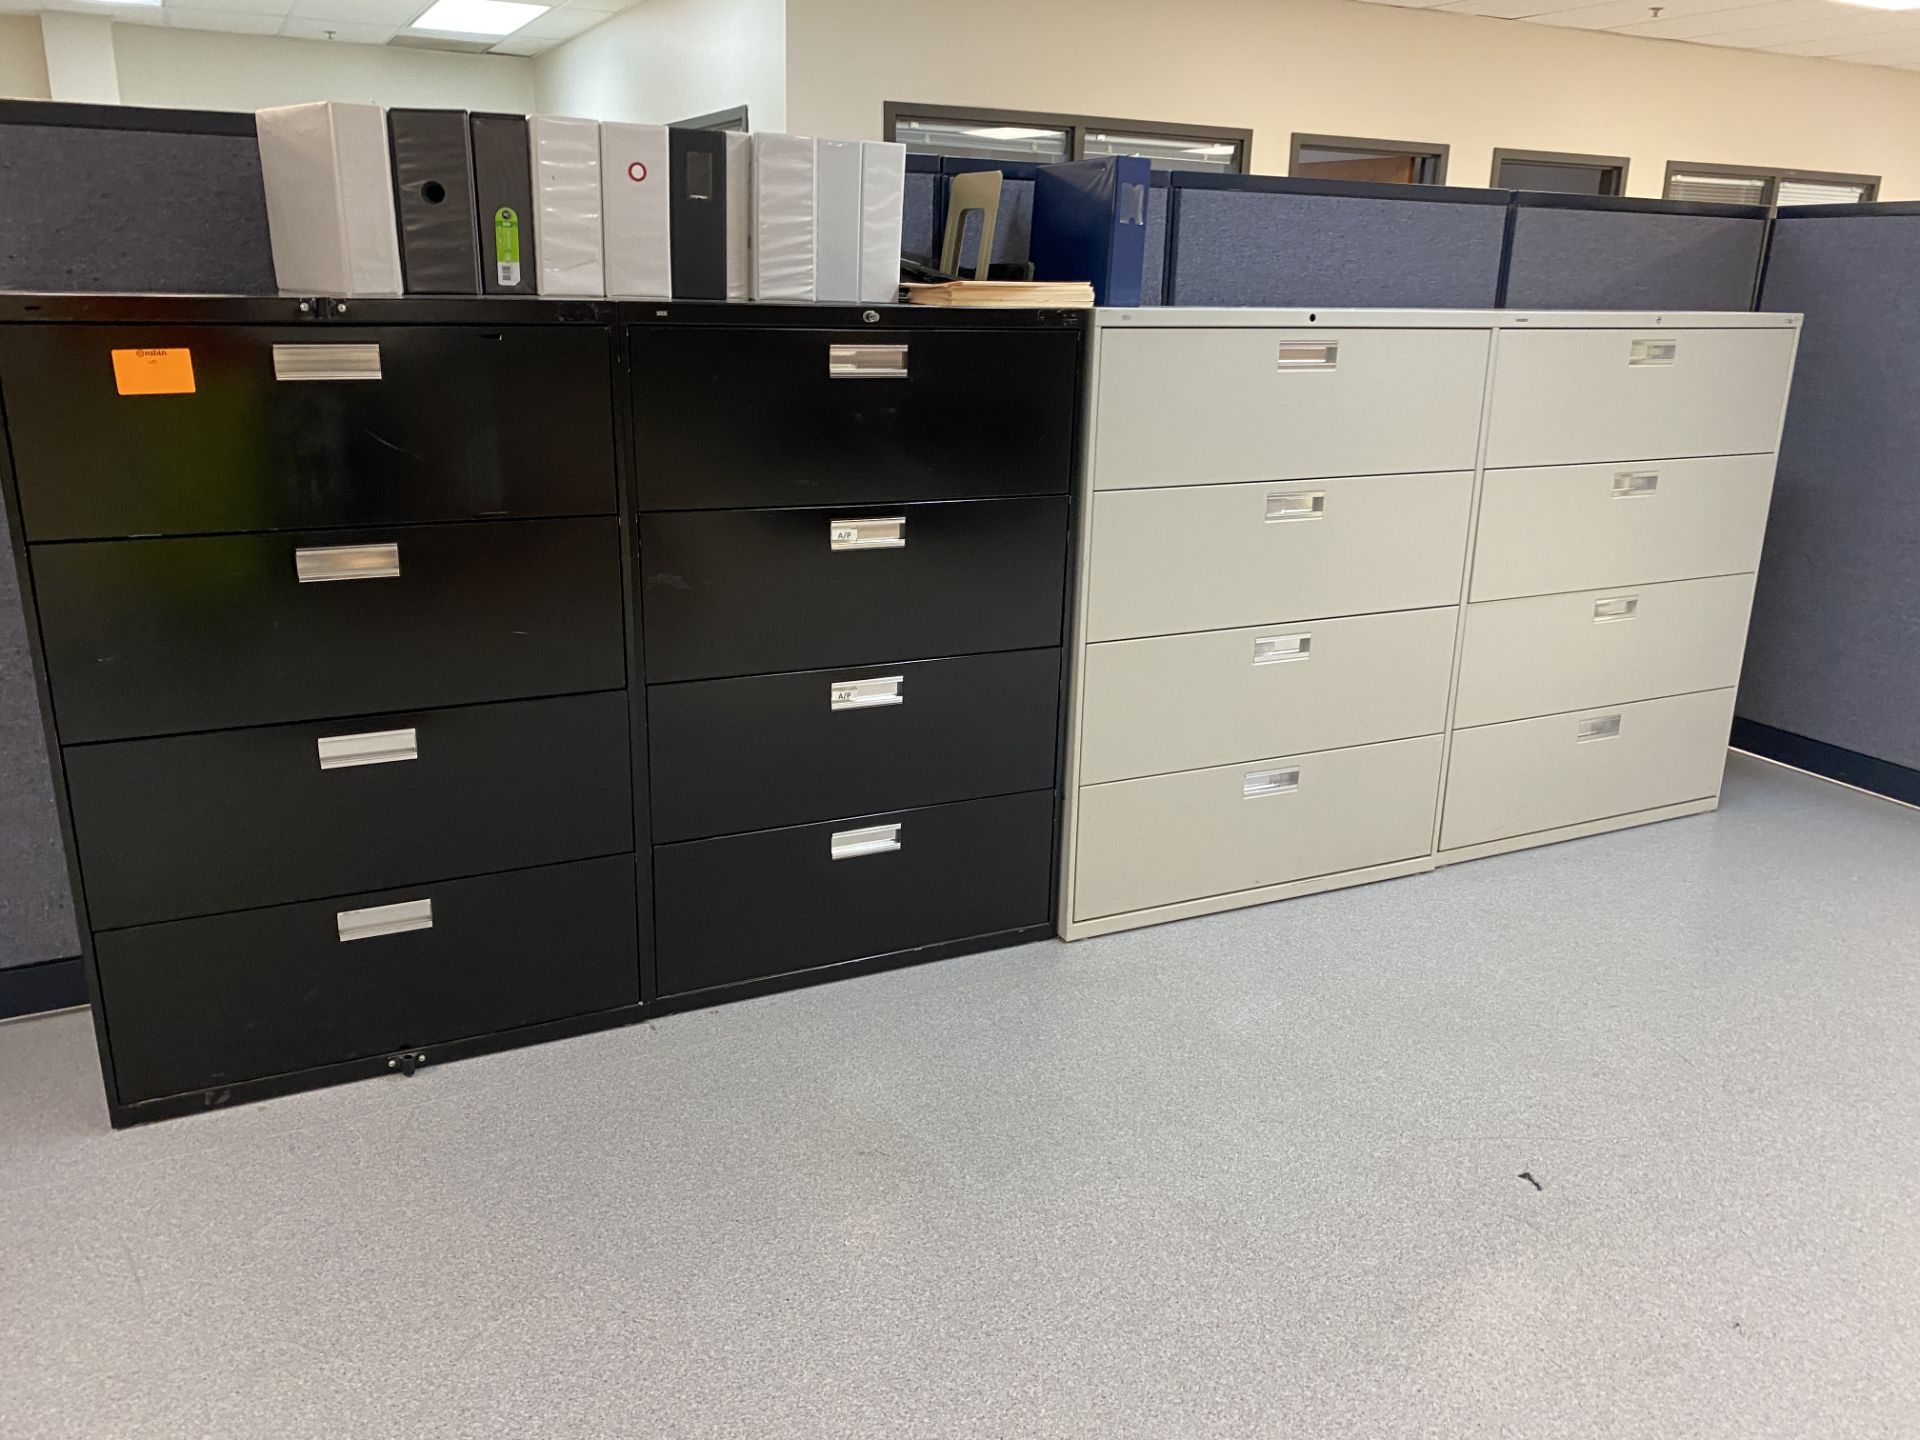 [LOT] (6) Metal lateral file cabinets plus (1) 2 door upright cabinet and (1) 4 drawers file cabinet